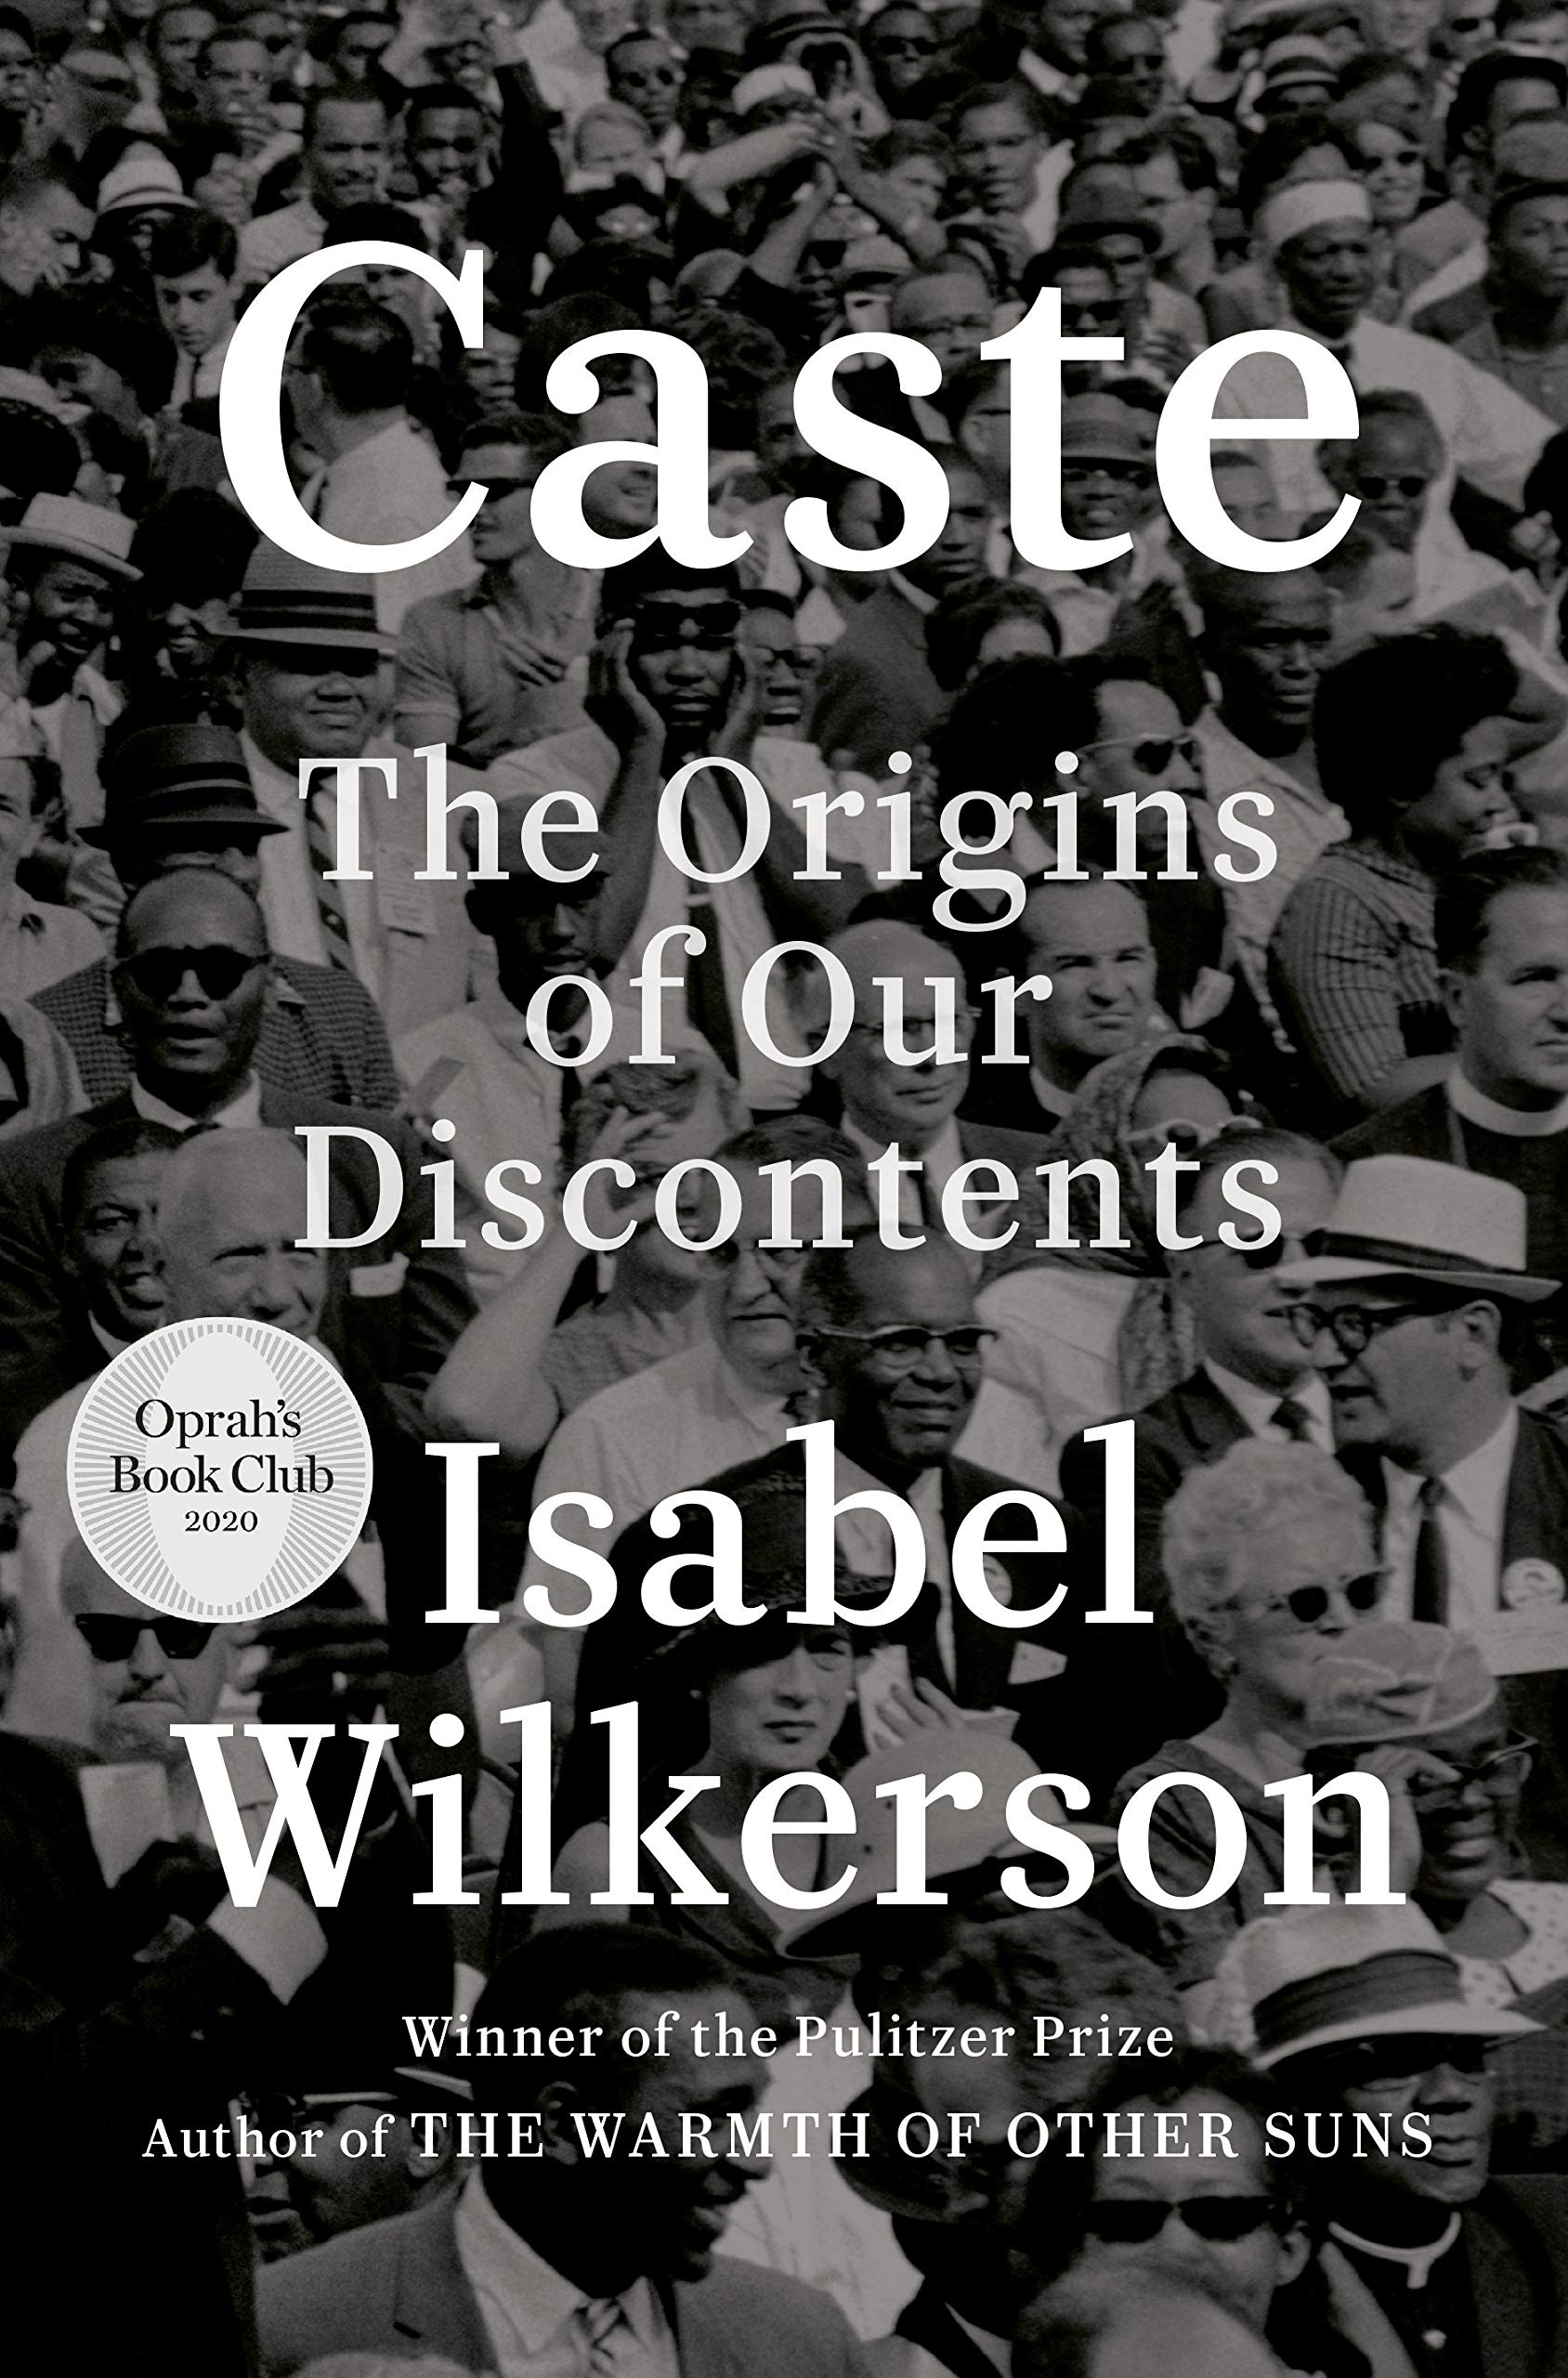 Caste (Oprah's Book Club): The Origins of Our Discontents Hardcover by Isabel Wilkerson